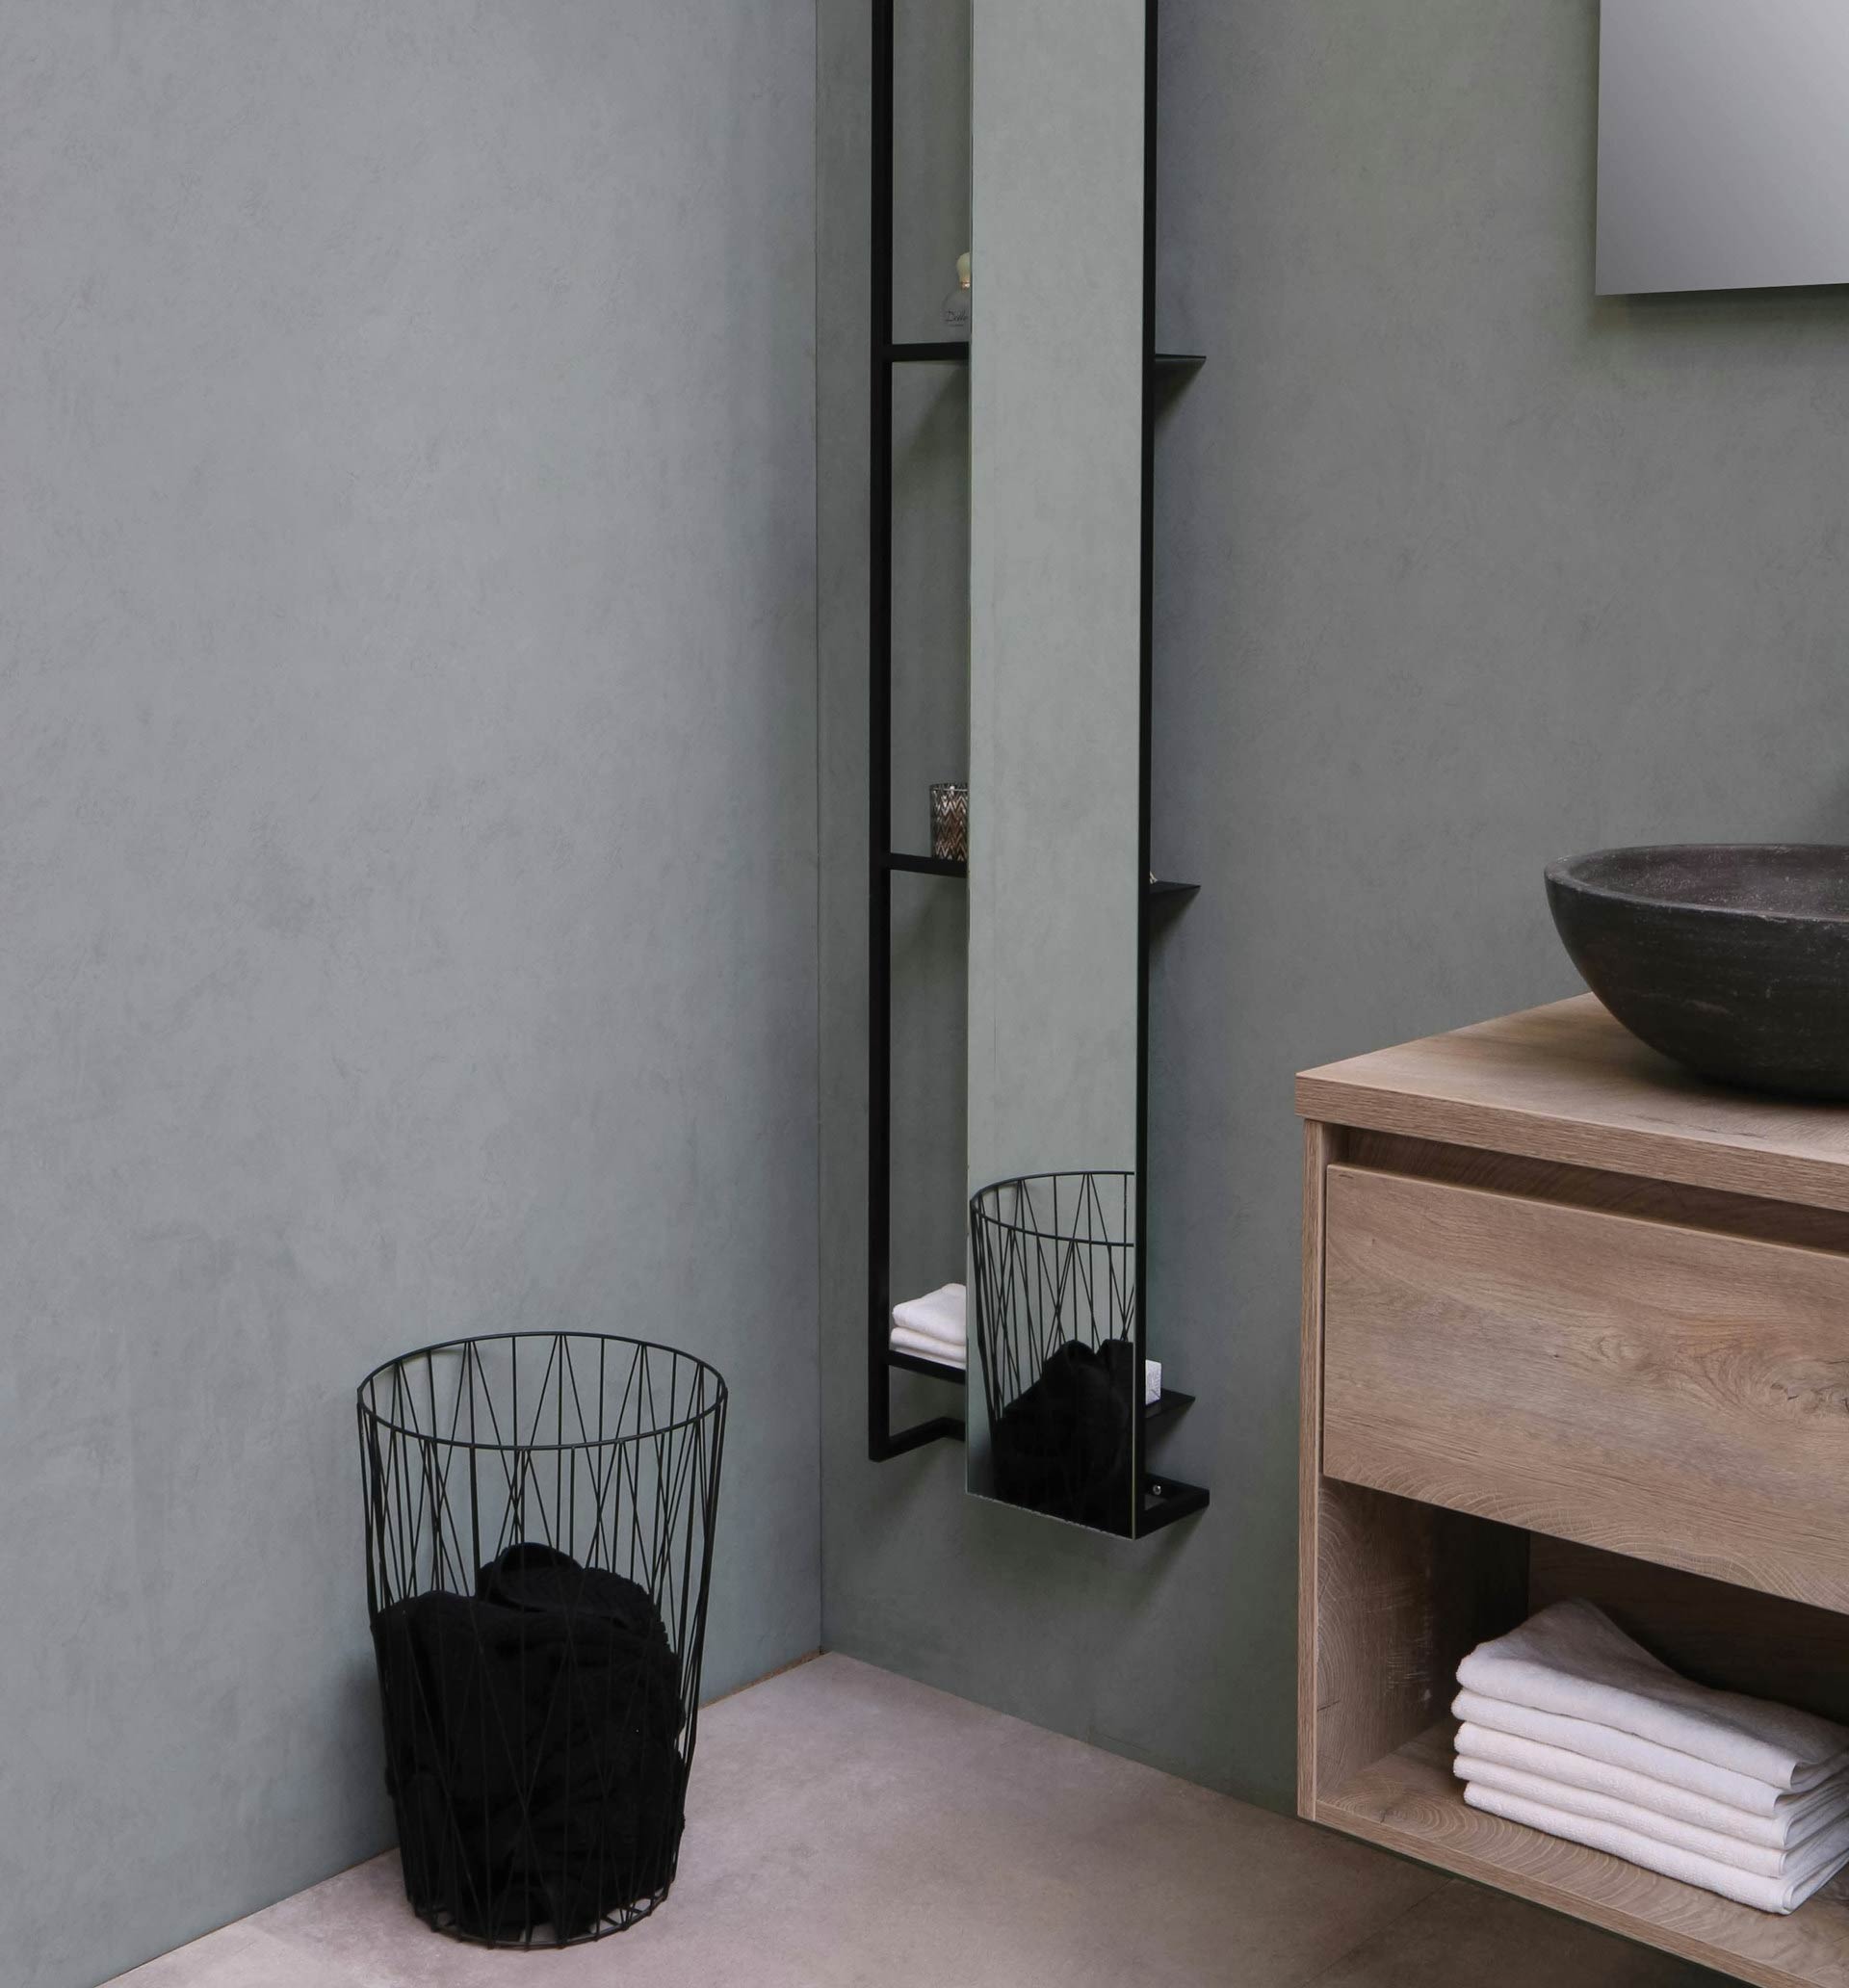 Gray bathroom with wooden cabinet, long, narrow vertical mirror, and black metal basket